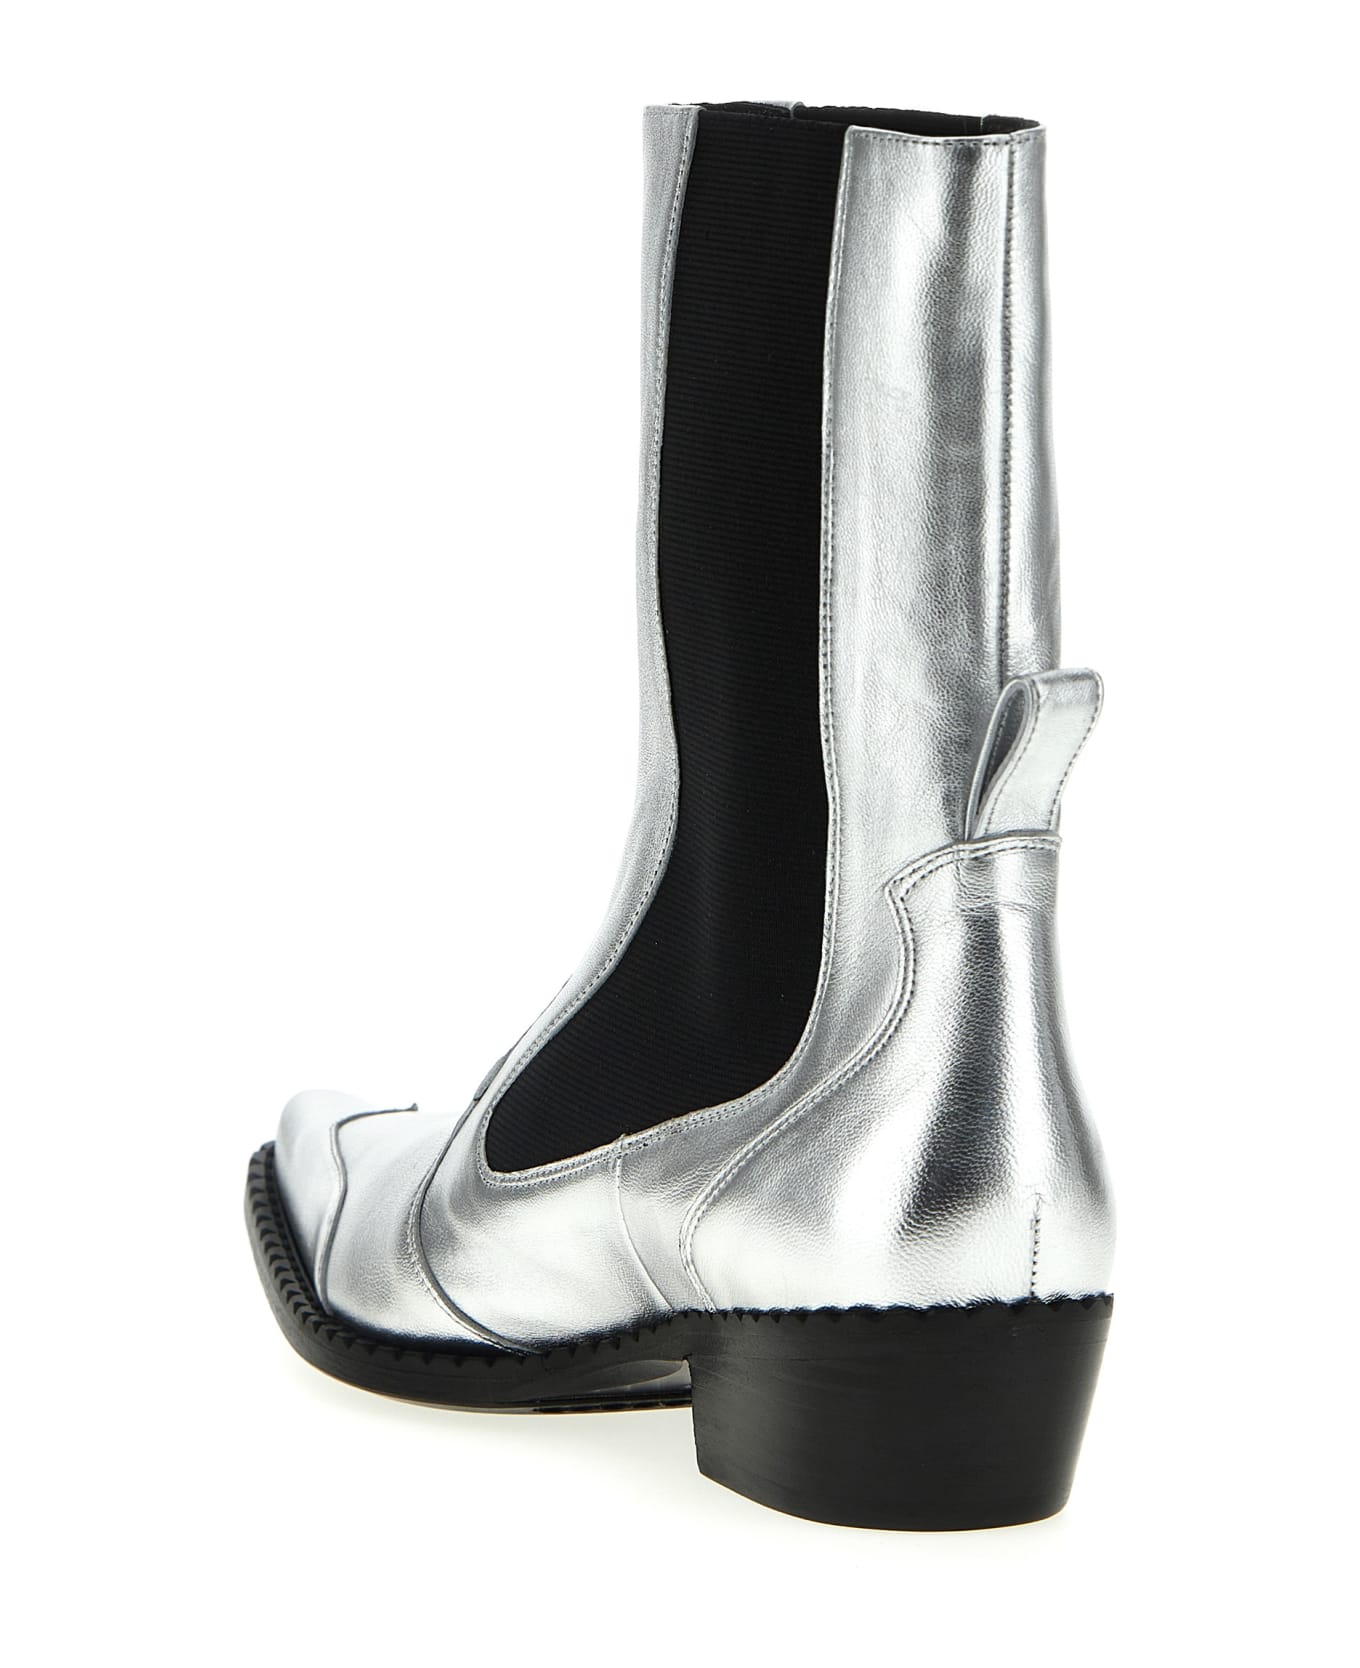 BY FAR 'otis' Ankle Boots - Silver ブーツ